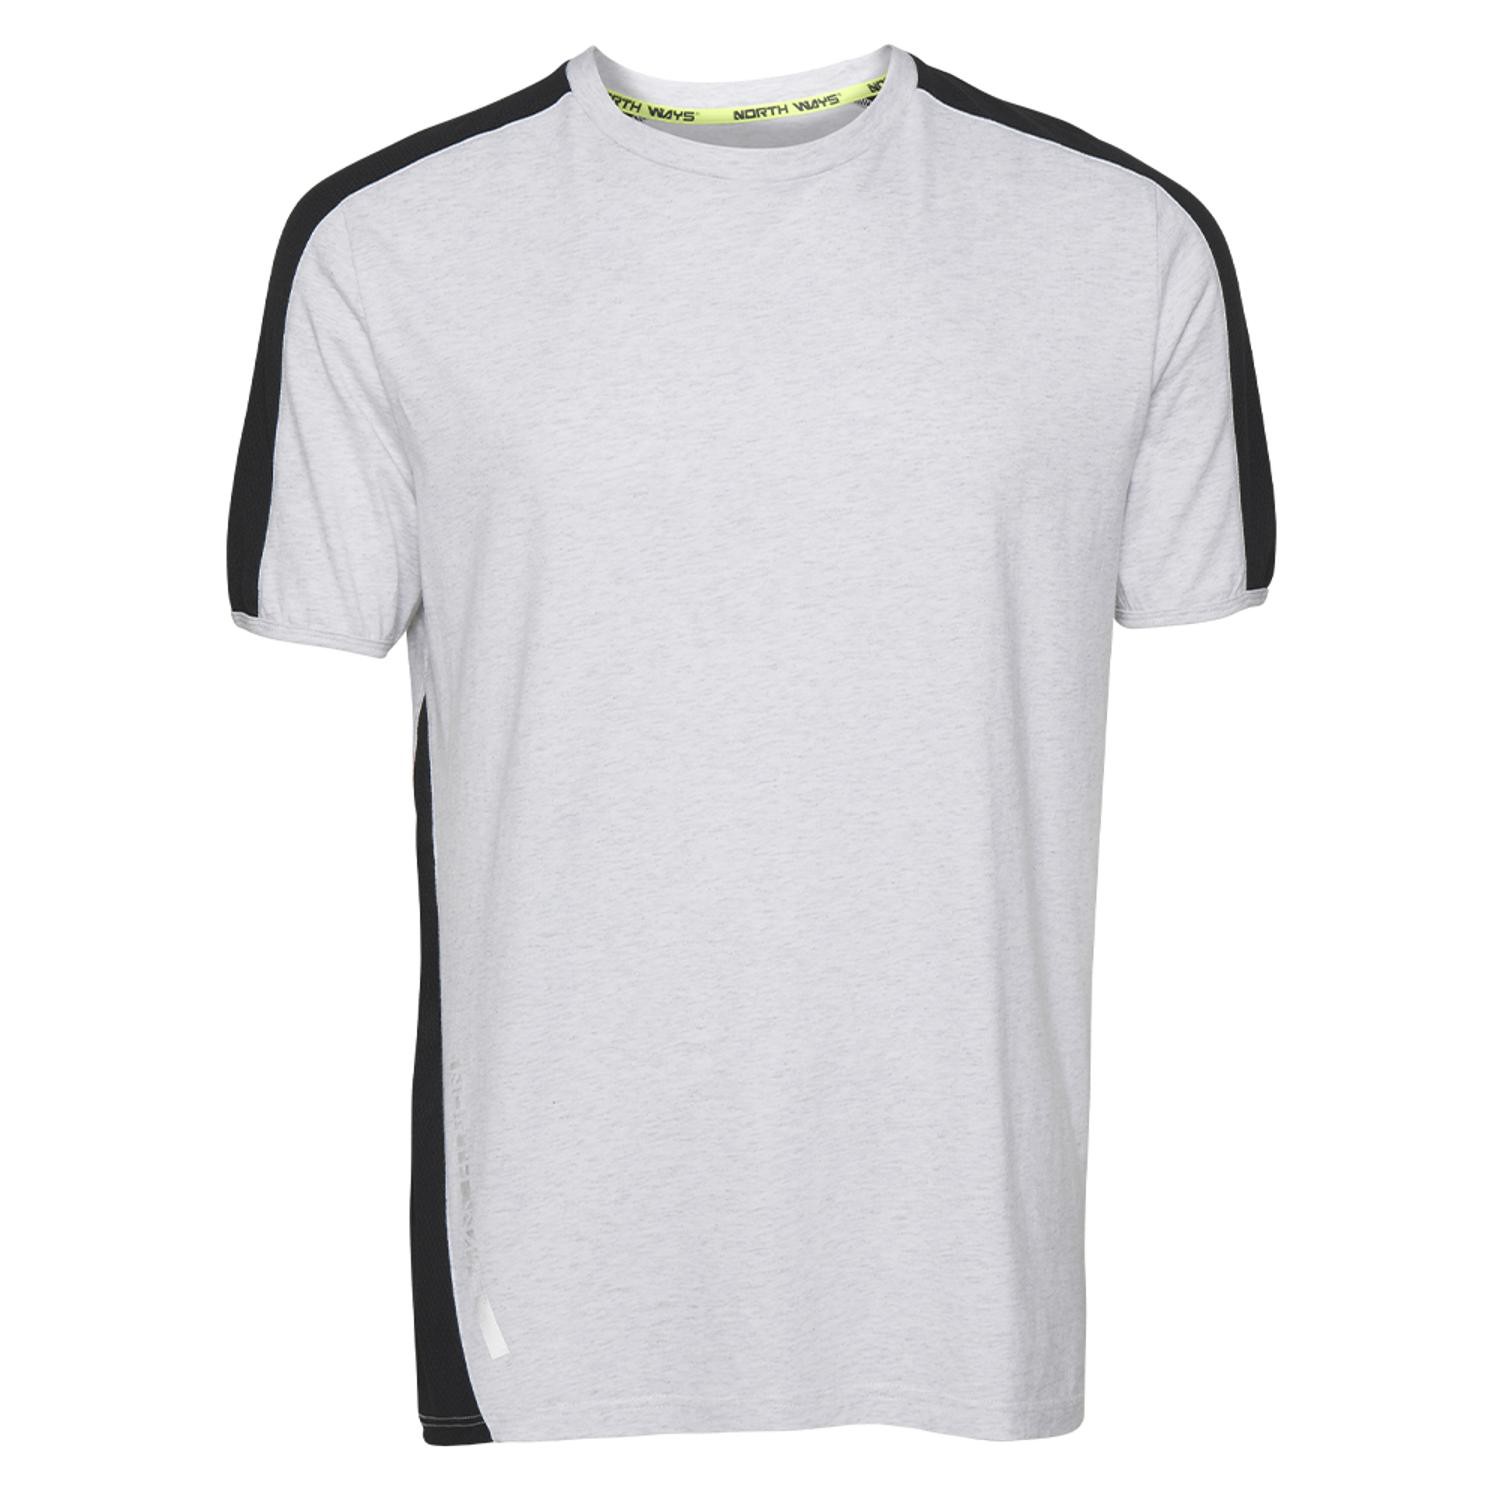 Tee shirt manches courtes contraste Andy North Ways blanc vue 1 cotepro.fr